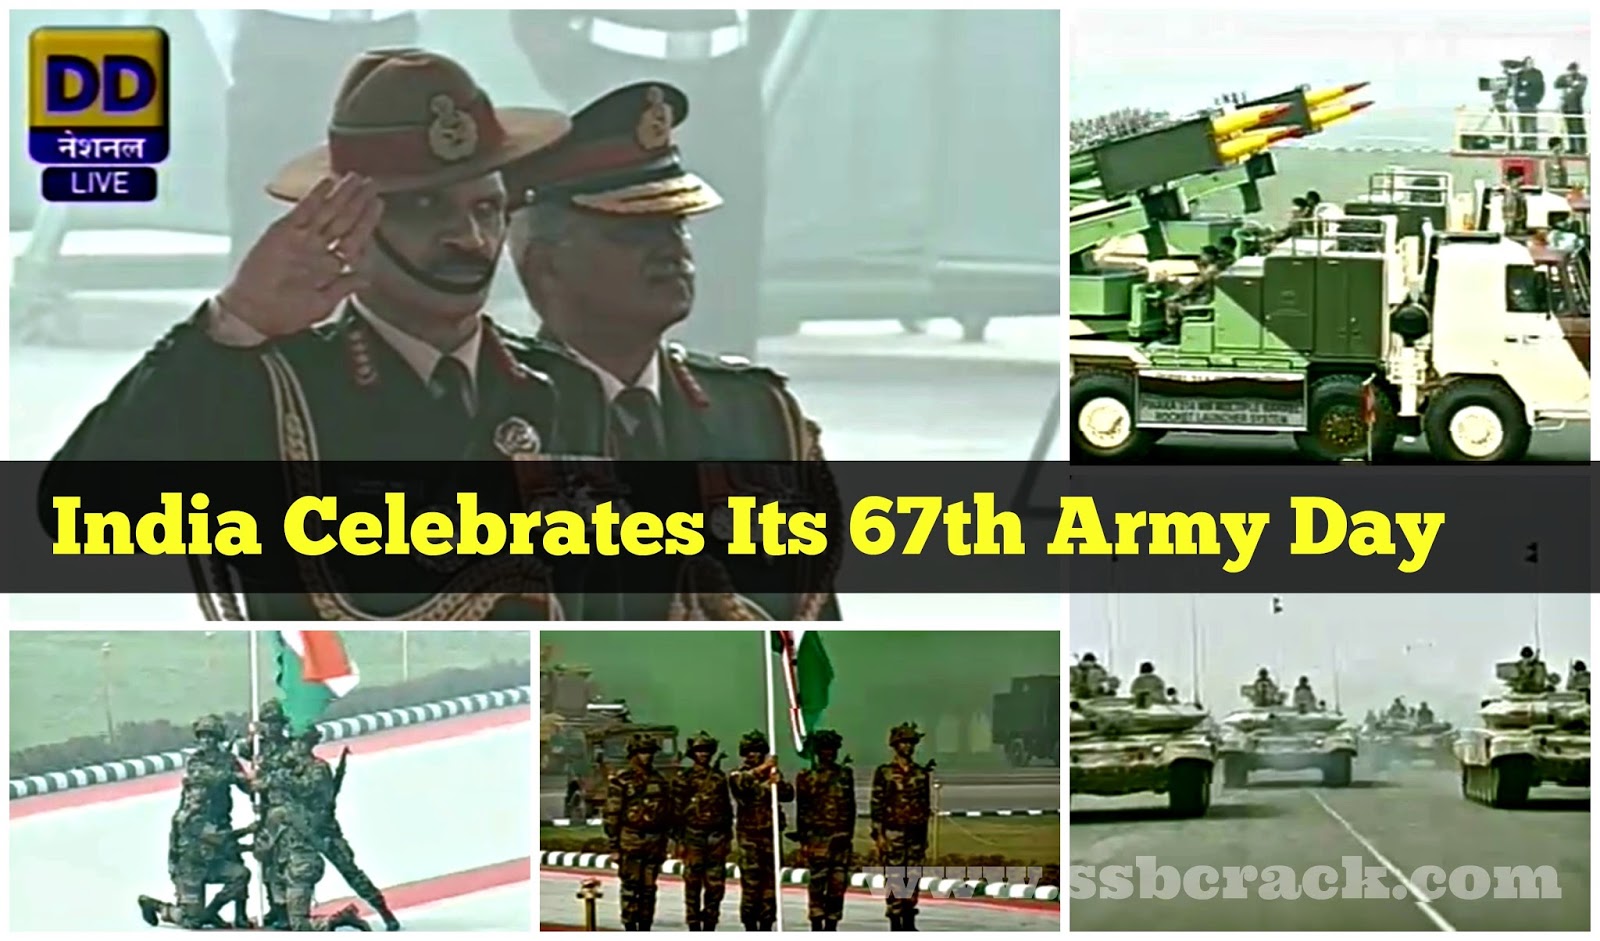 India Celebrates Its 67th Army Day1600 x 941